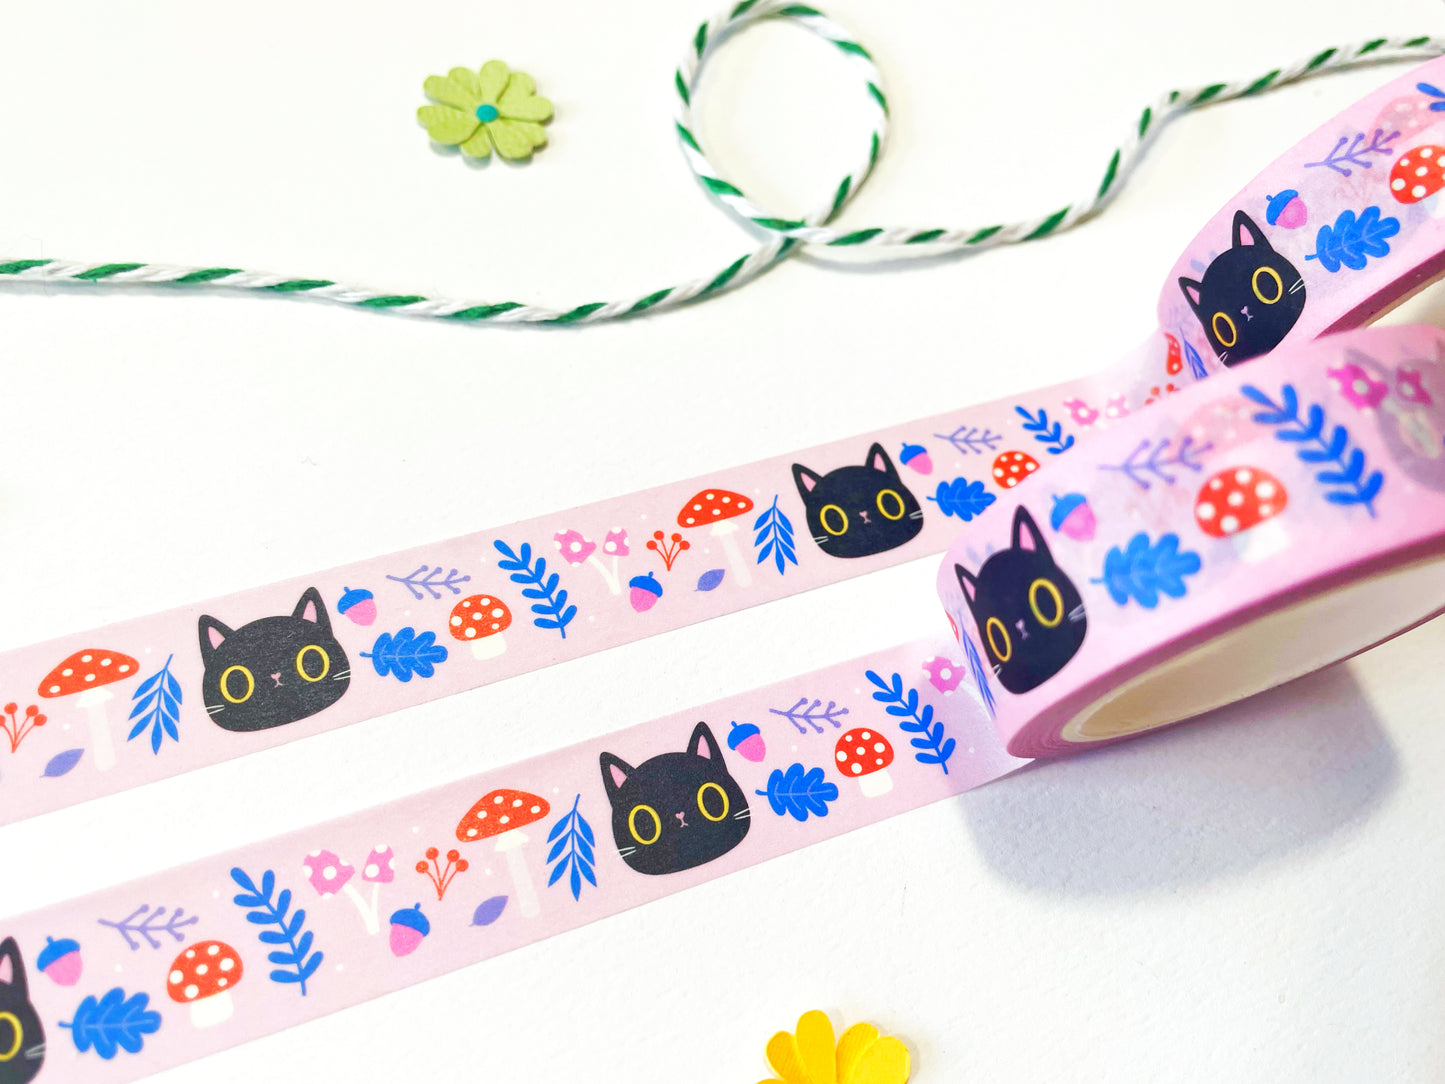 Black Cats Kawaii Washi Tape - Super cute stationery for cat lovers